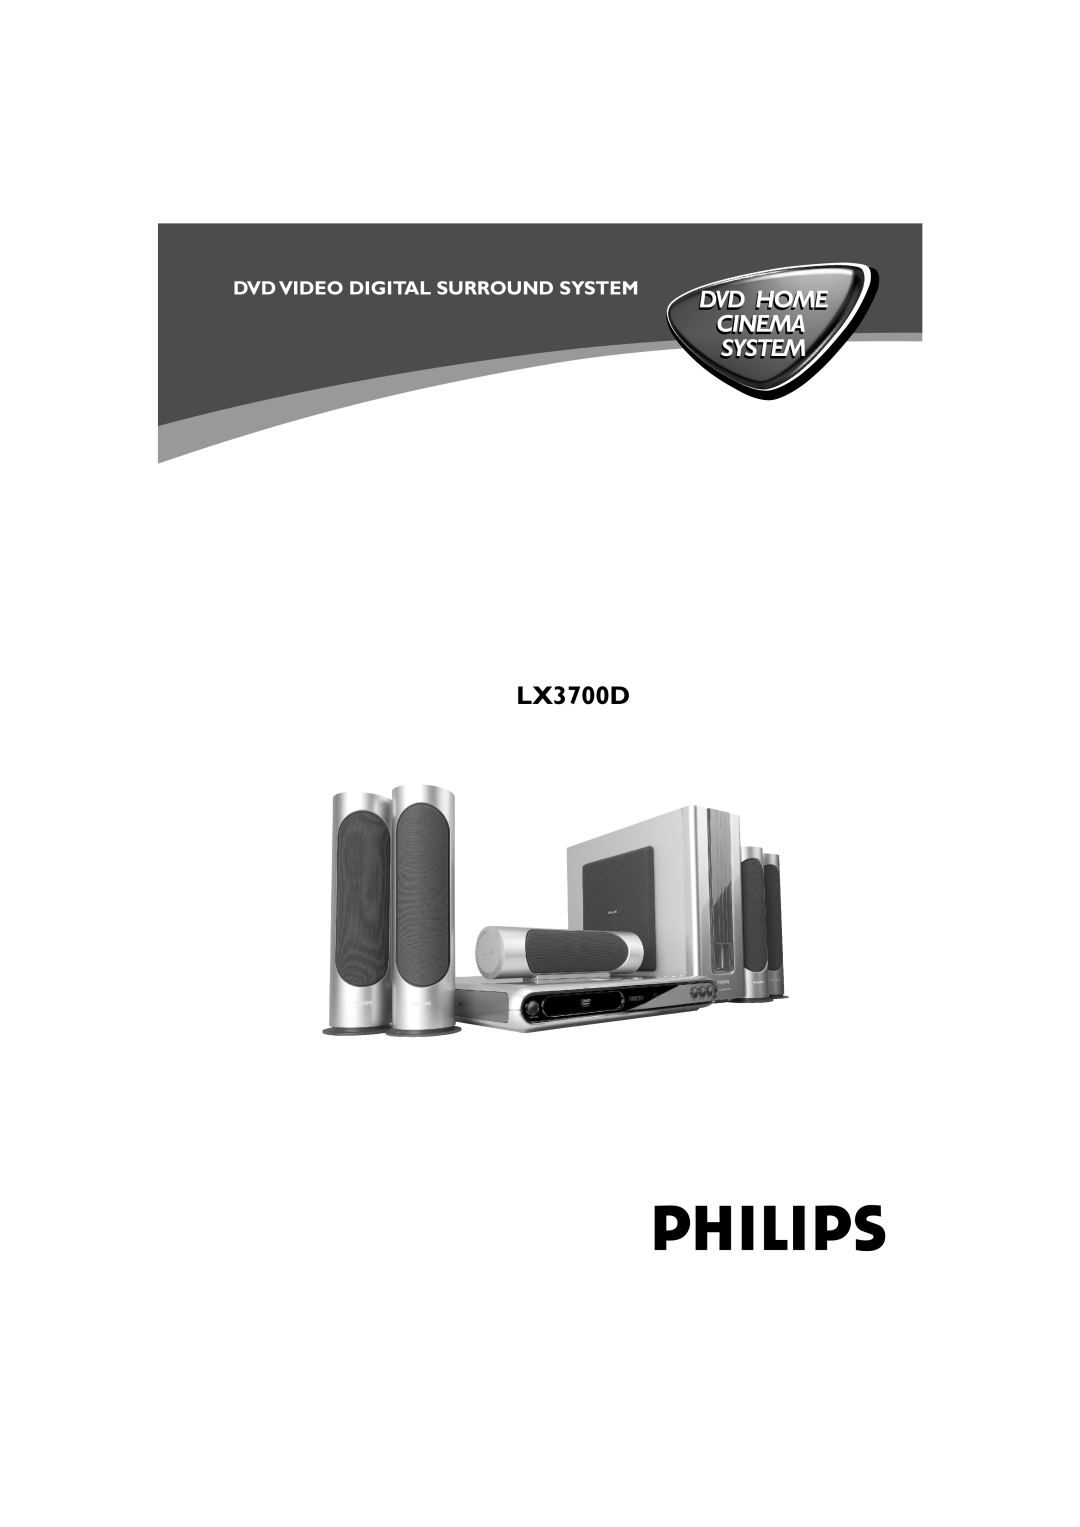 Philips LX3700D manual Dvd Home Cinema System, Dvd Video Digital Surround System 